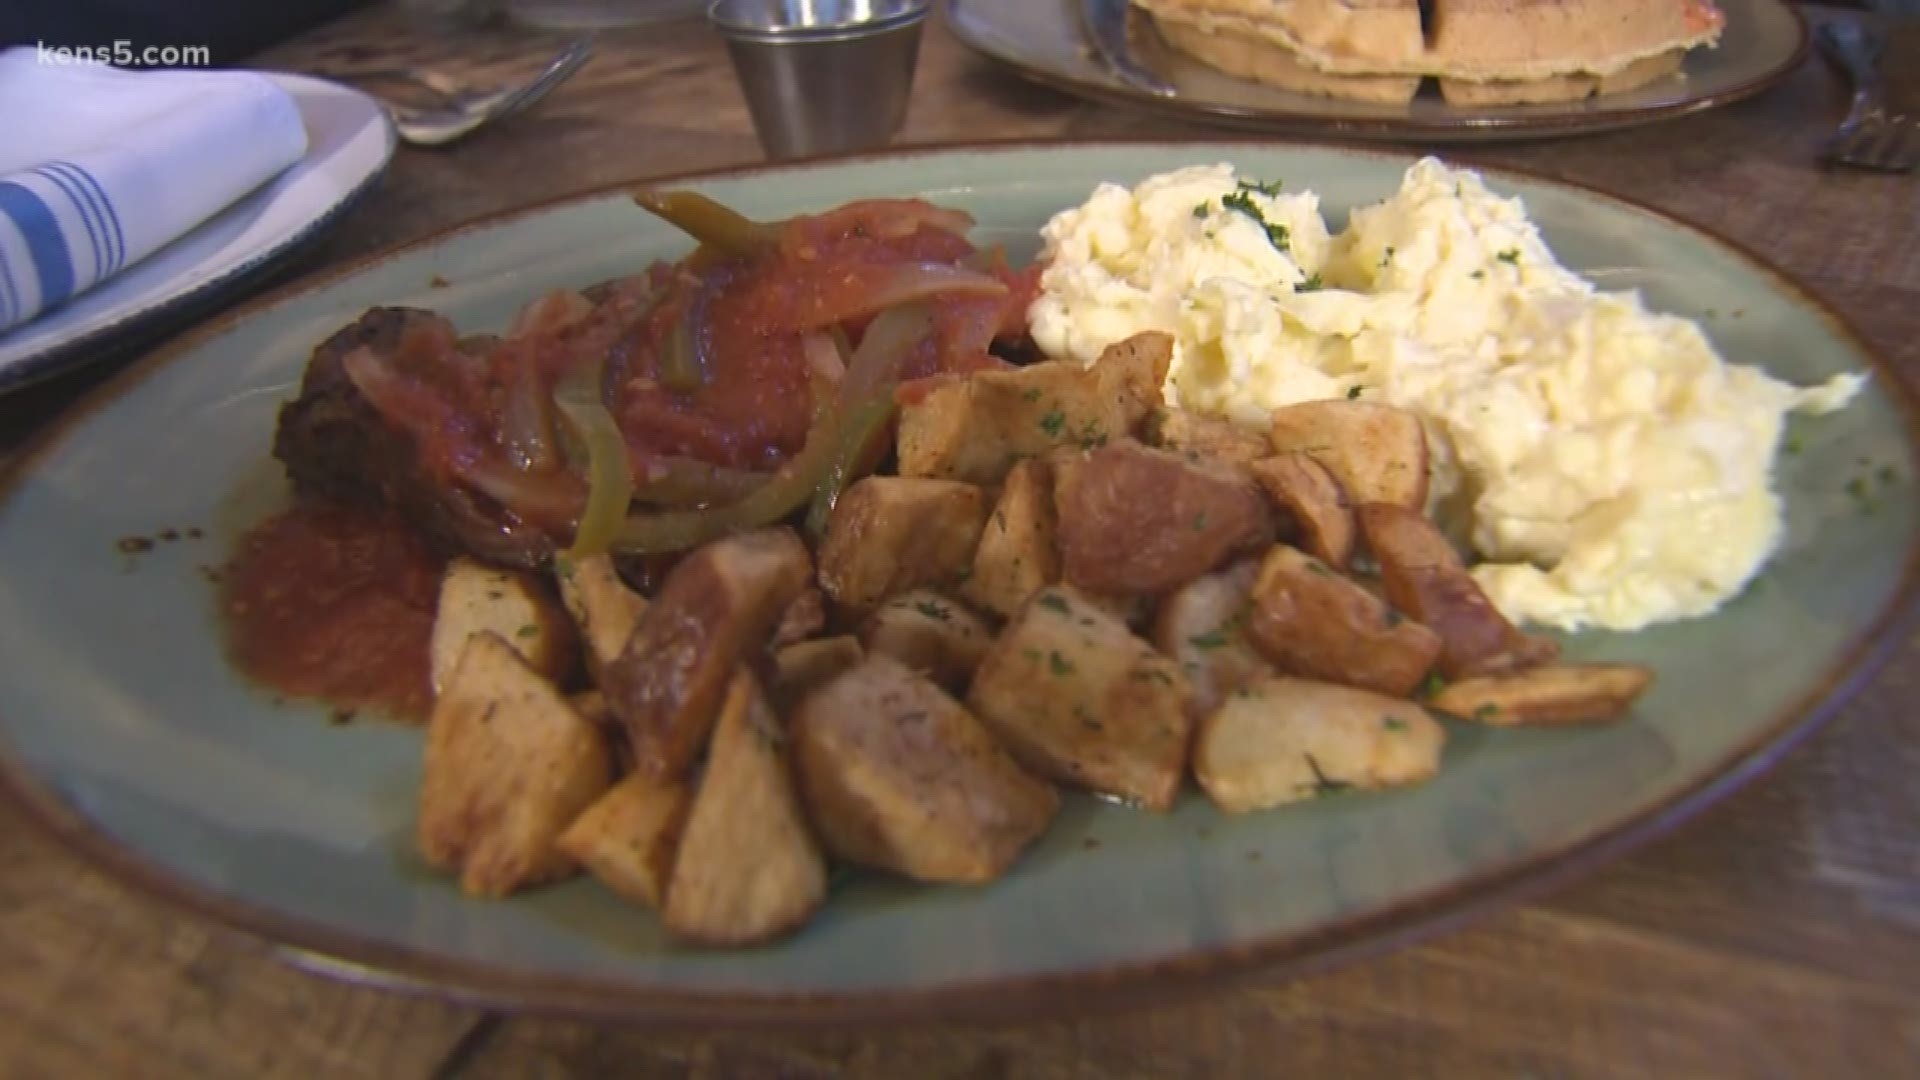 The Neighborhood Eats Sunrise Scramble is adding some "fine food" to your breakfast routine. This morning, Marvin Hurst stops by Southerleigh Fine Food and Brewery.